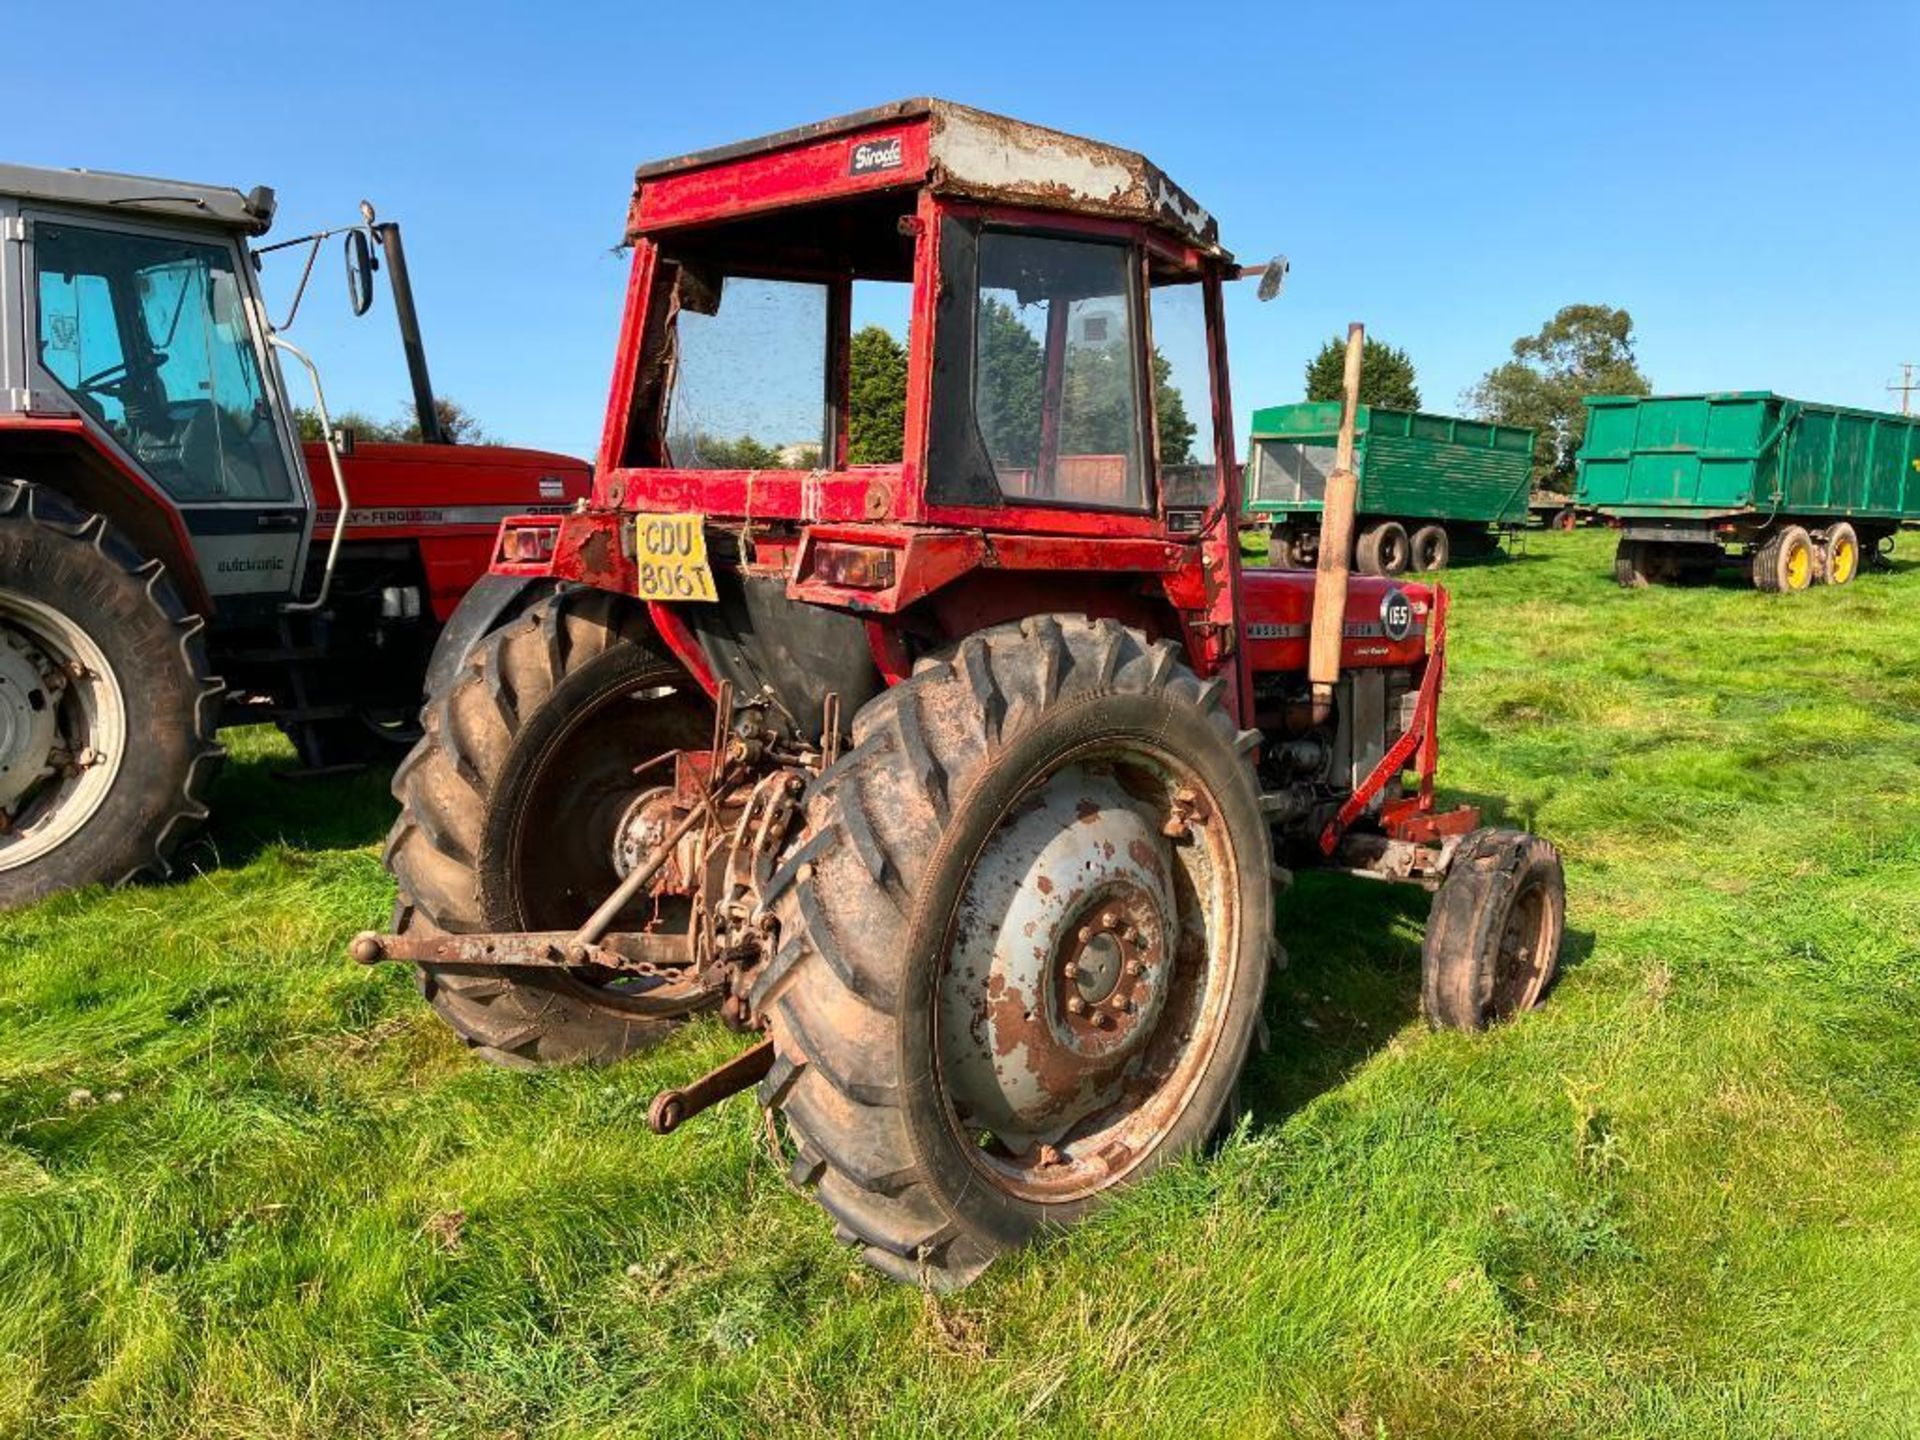 1978 Massey Ferguson 165 Multipower 2wd diesel tractor with Sirocco cab on 7.5-16 front and 12.4/11- - Image 2 of 7